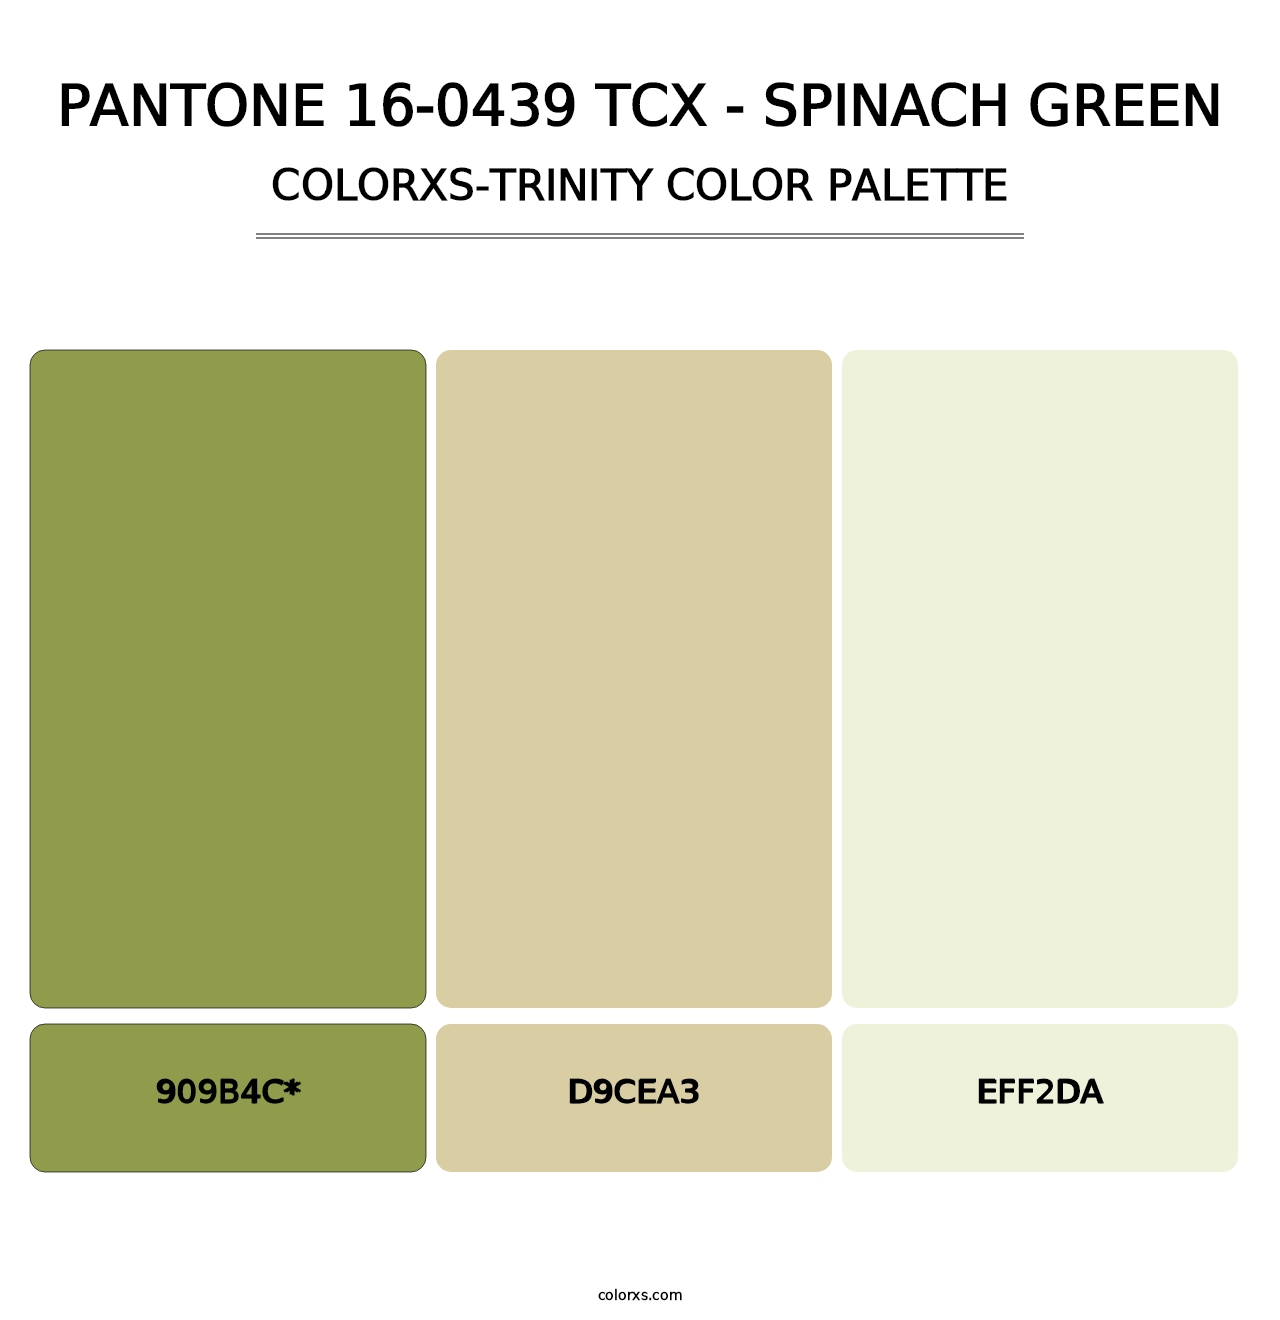 PANTONE 16-0439 TCX - Spinach Green - Colorxs Trinity Palette